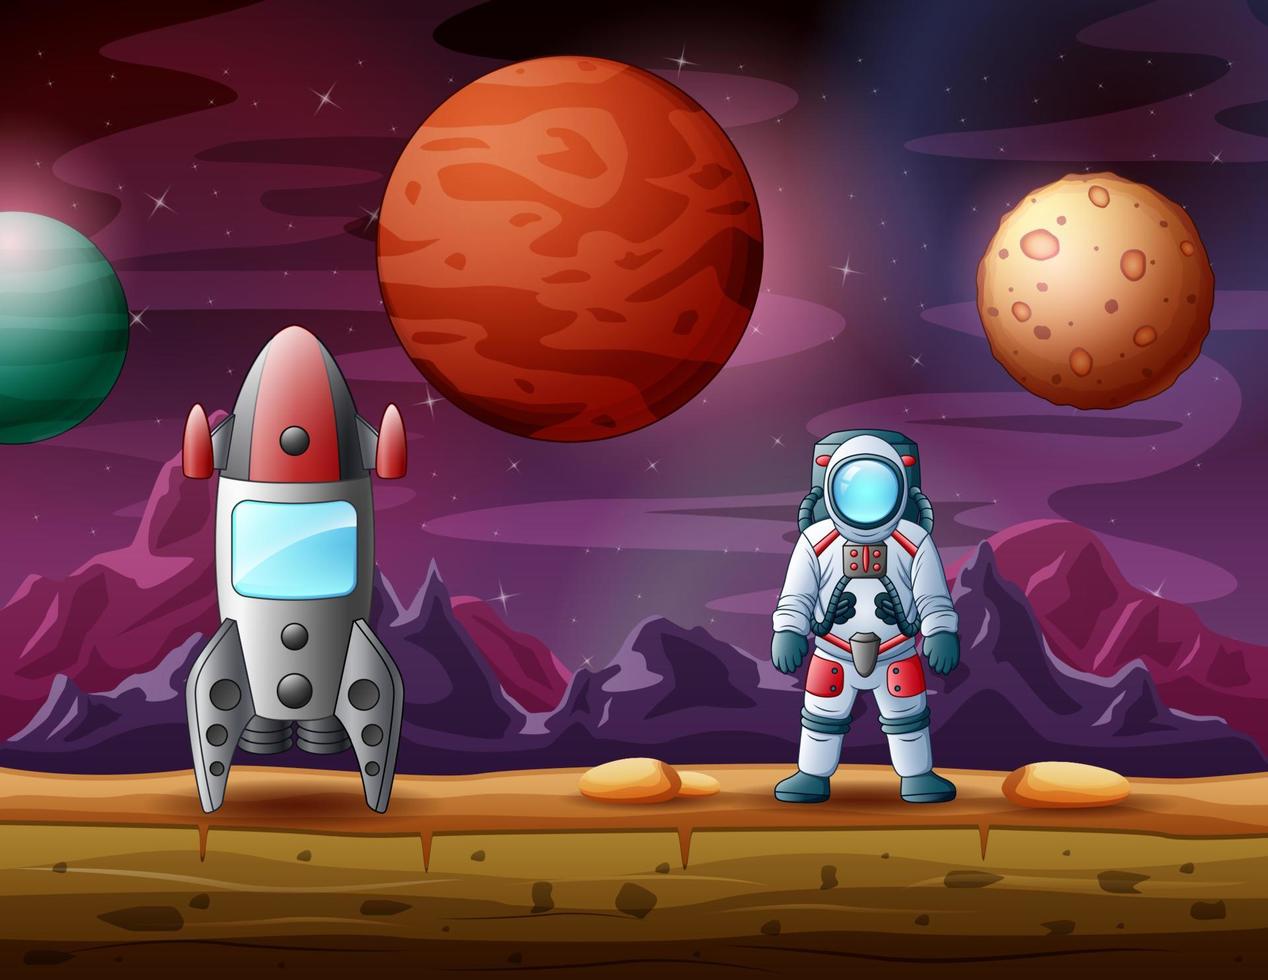 Astronaut and rocket landed on a moon with alien planets background vector